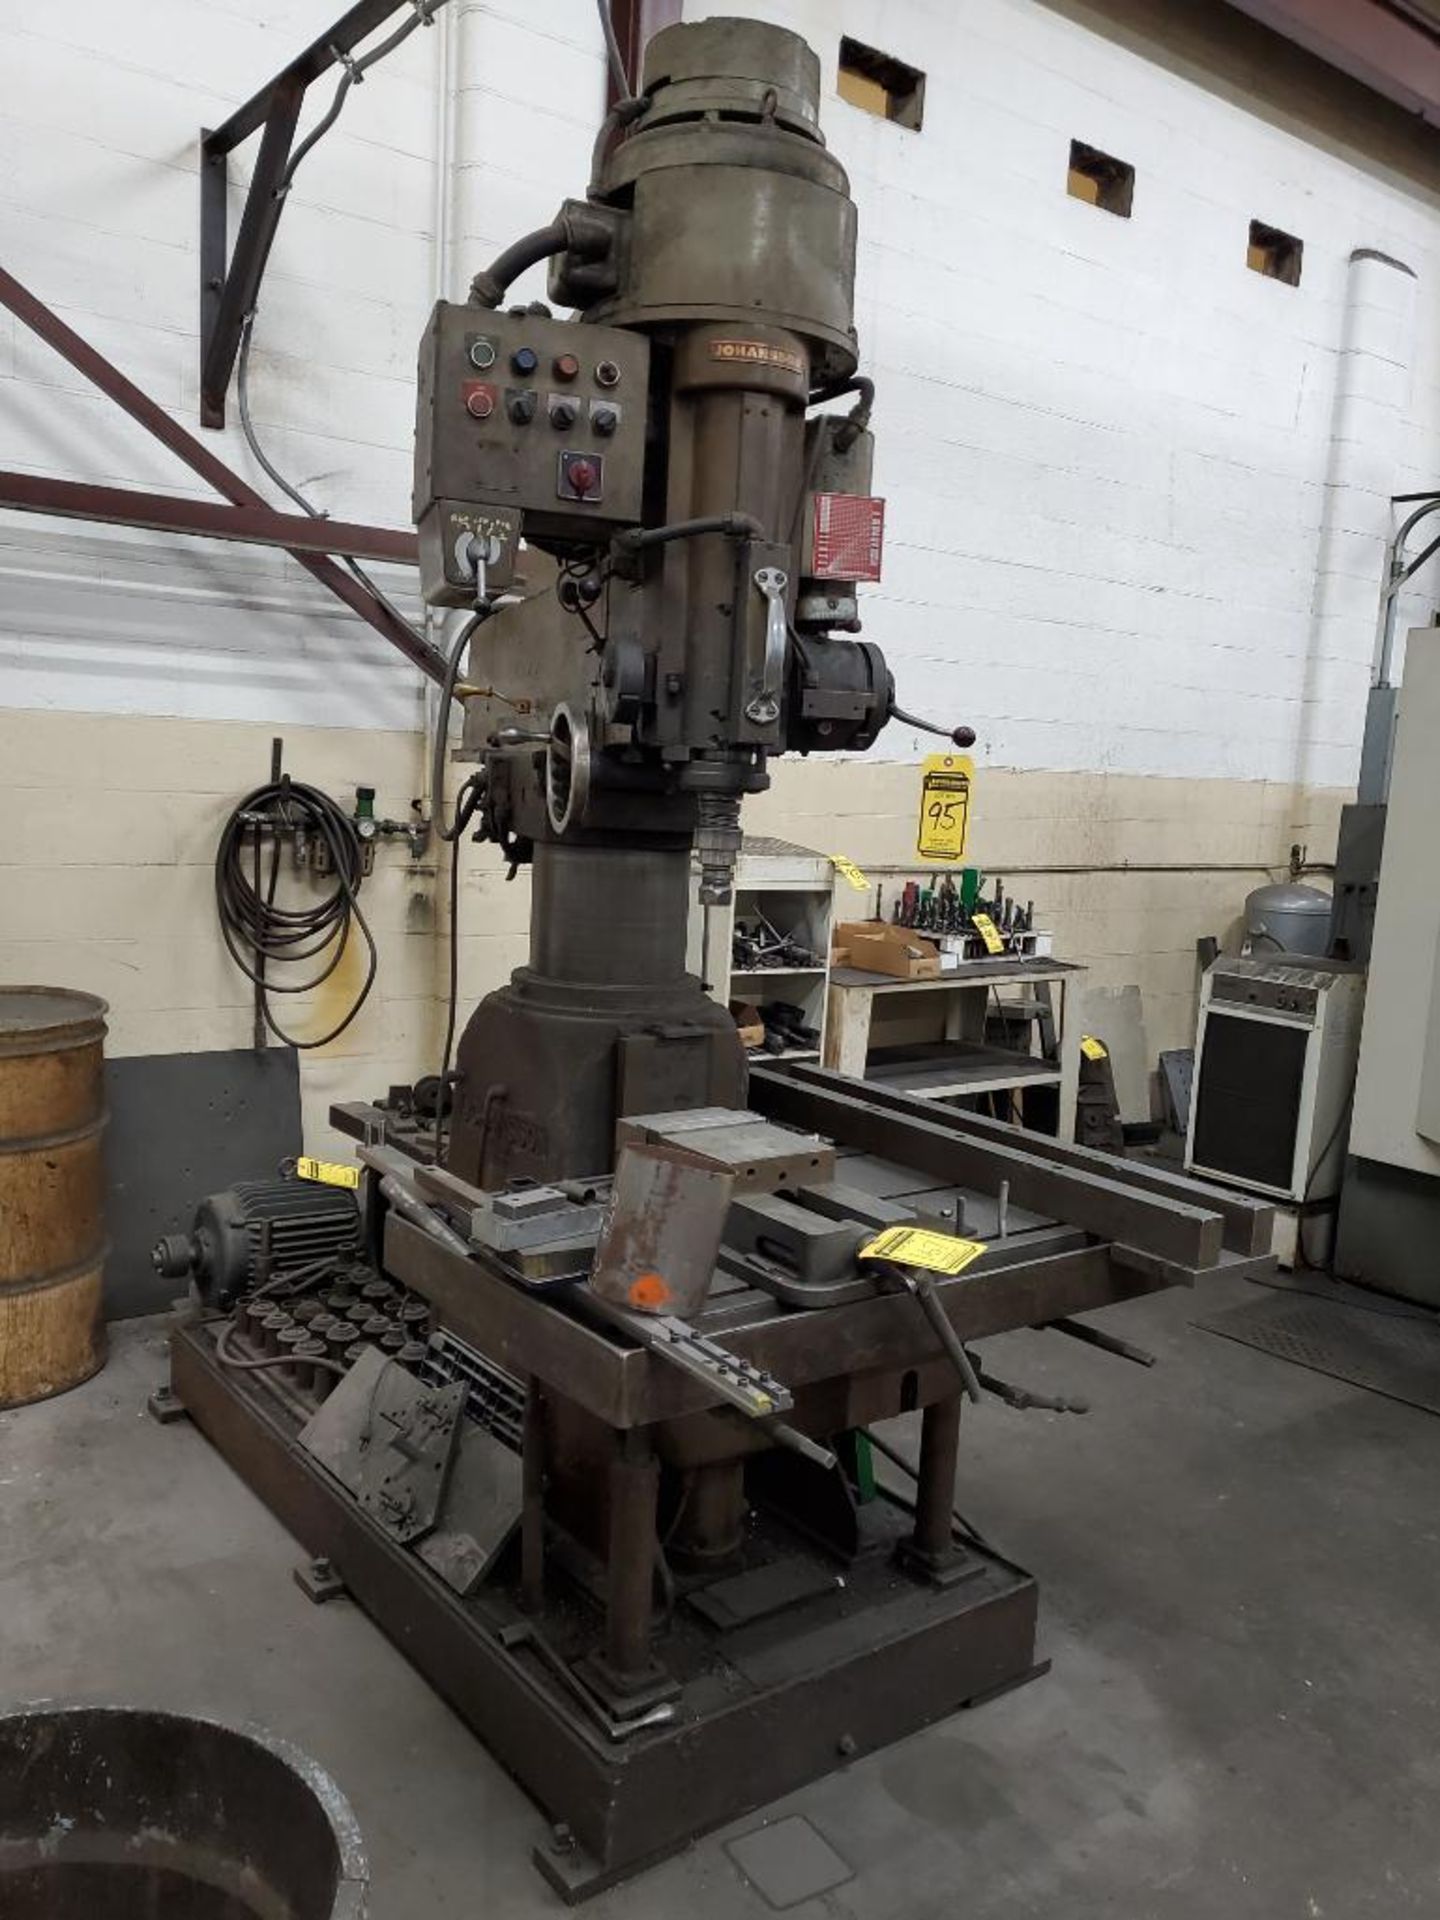 Johansson Radial Arm Drill, 67" Traverse Arm, 45" X 22" Knee Bed Front Table, 24" X 24" X 20" Angle - Image 2 of 14